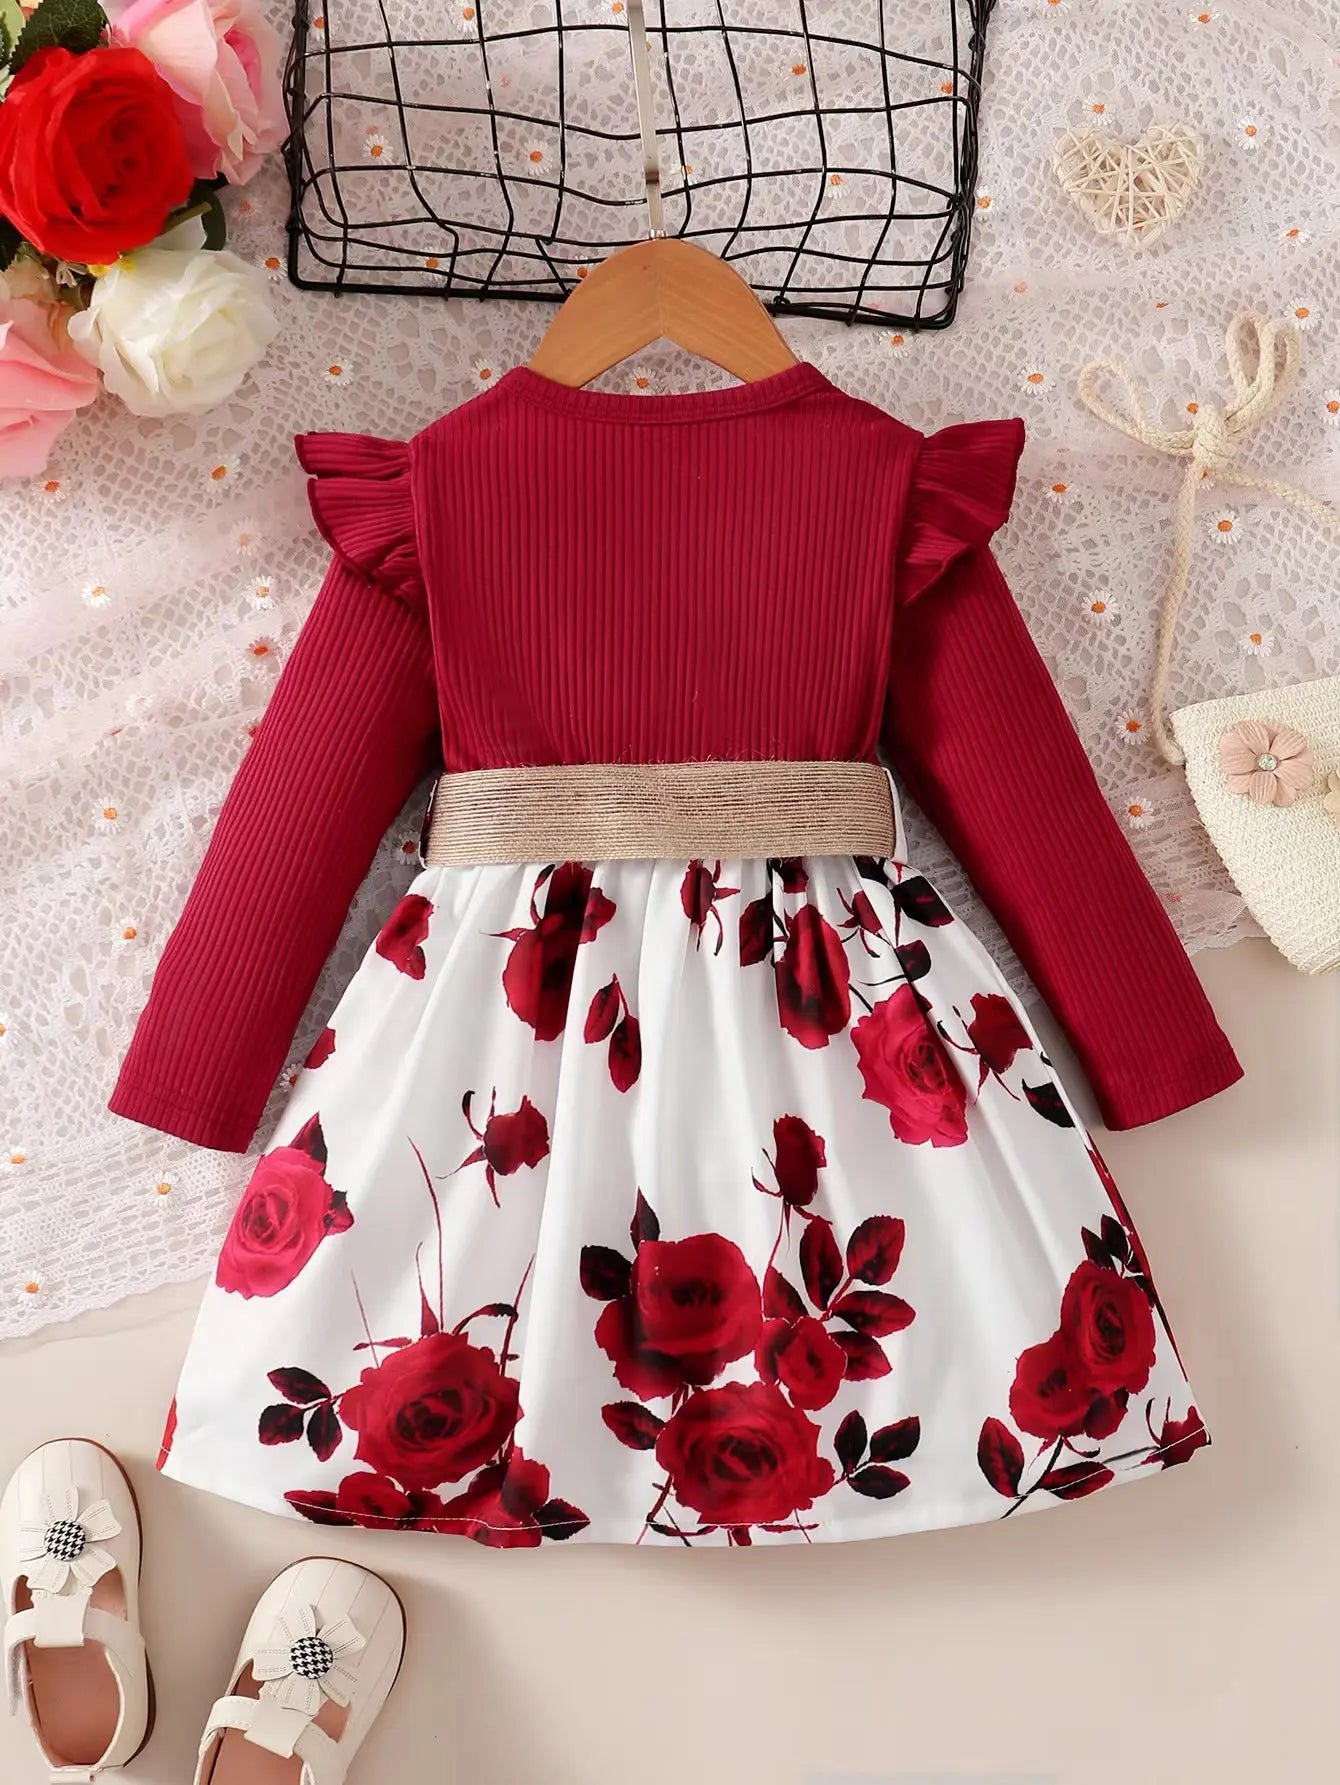 Girls Dress Red Long Sleeved Flower Skirt Party Wear Outfits